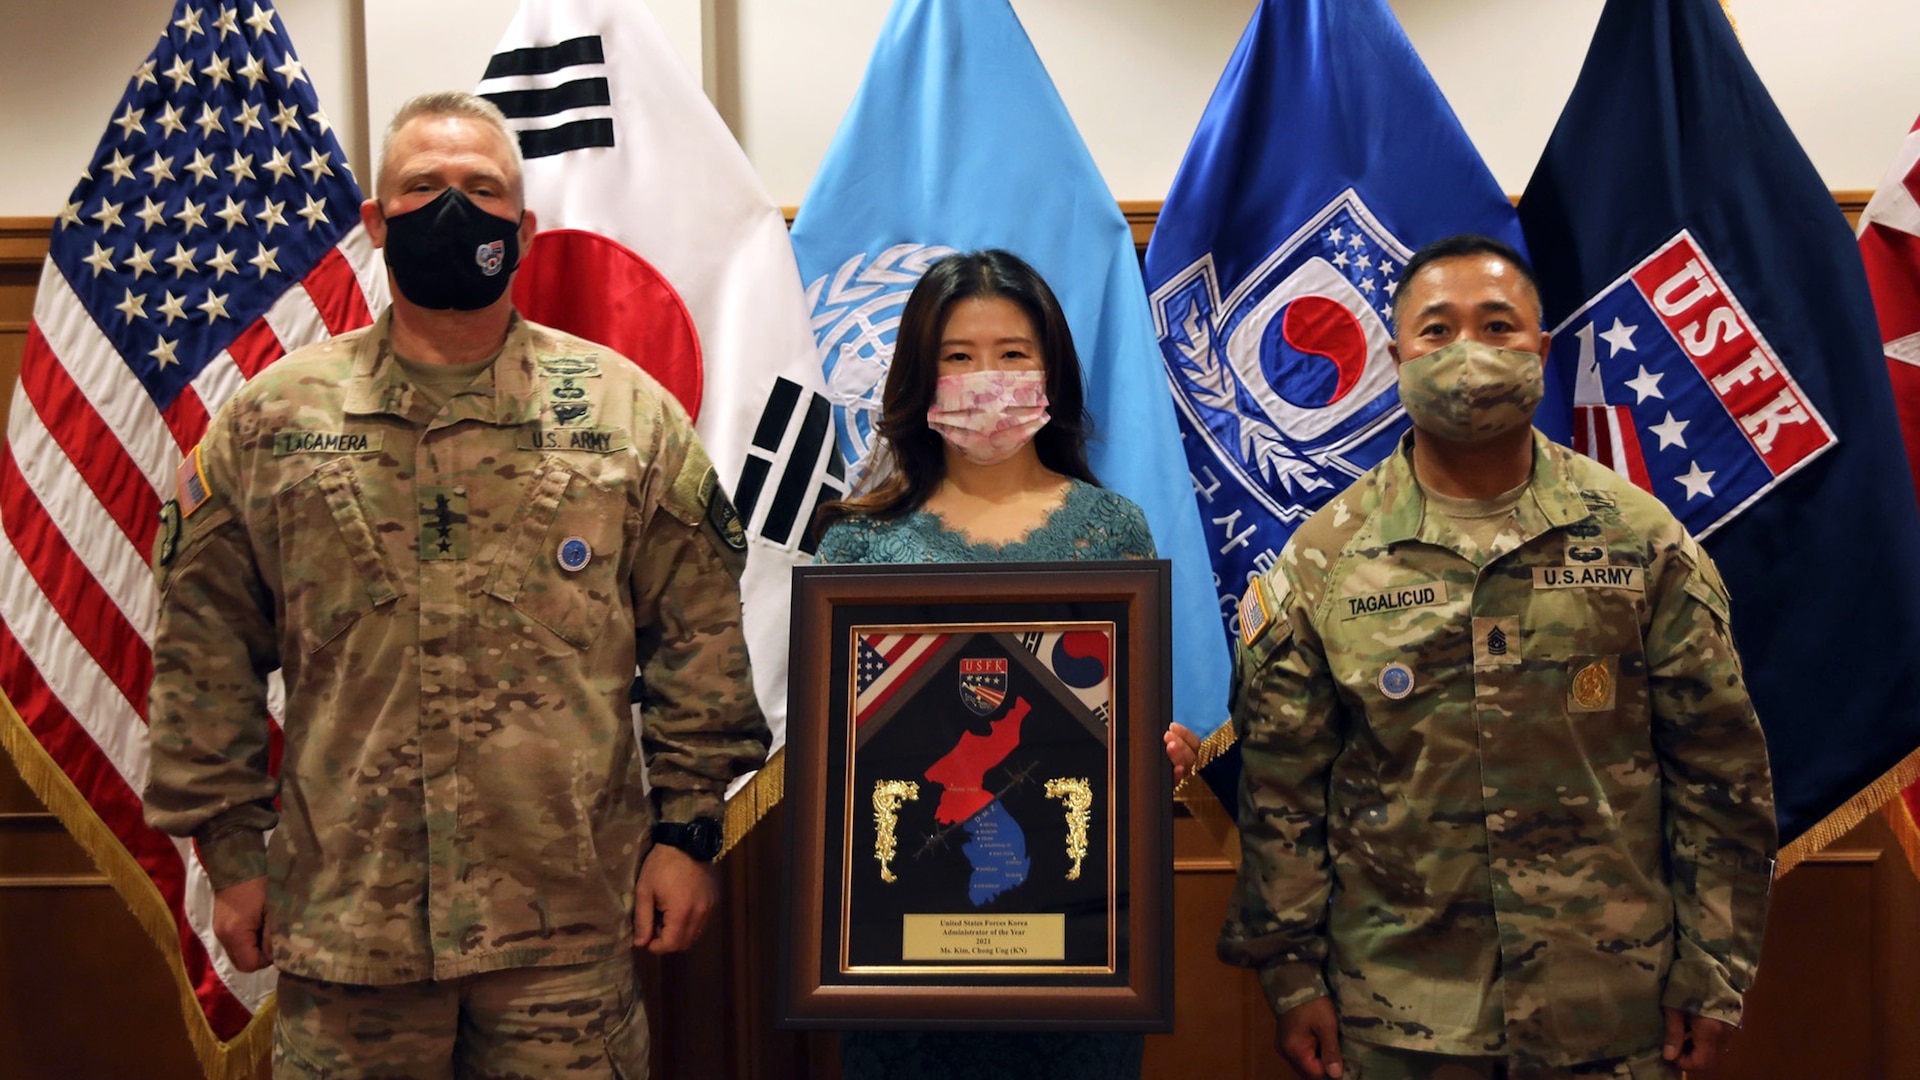 United States Forces Korea leadership presented the USFK Civilian Employee of the Year Award to a DLA employee.